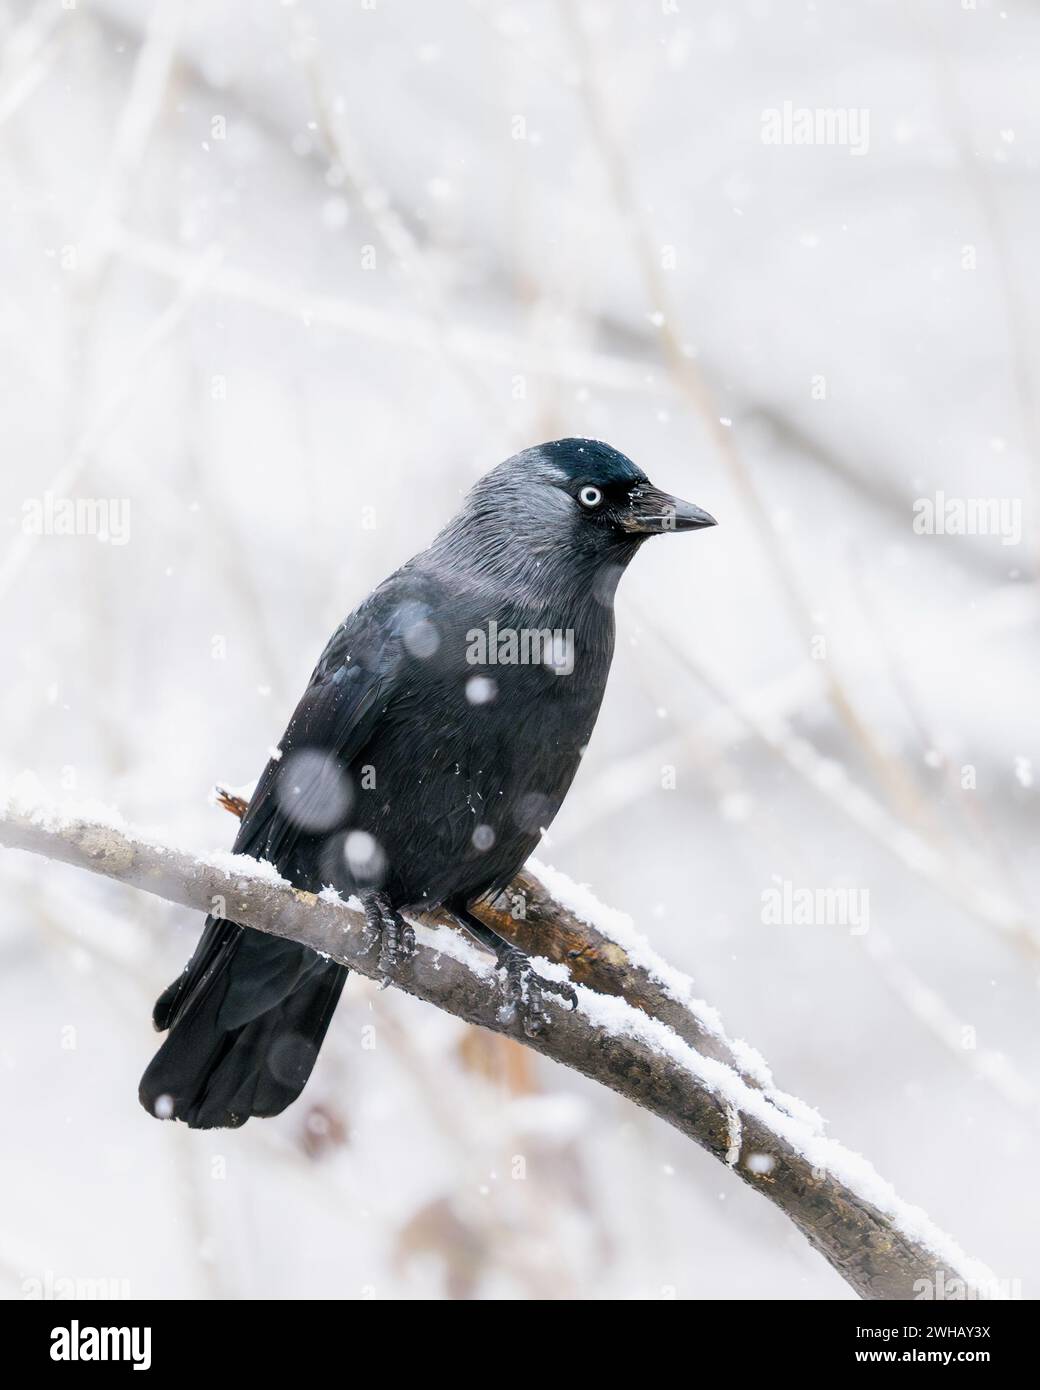 Jackdaw (Coloeus monedula) perched on tree branch with snowflakes snowing. Adel Dam Nature Reserve, West Yorkshire, UK Stock Photo